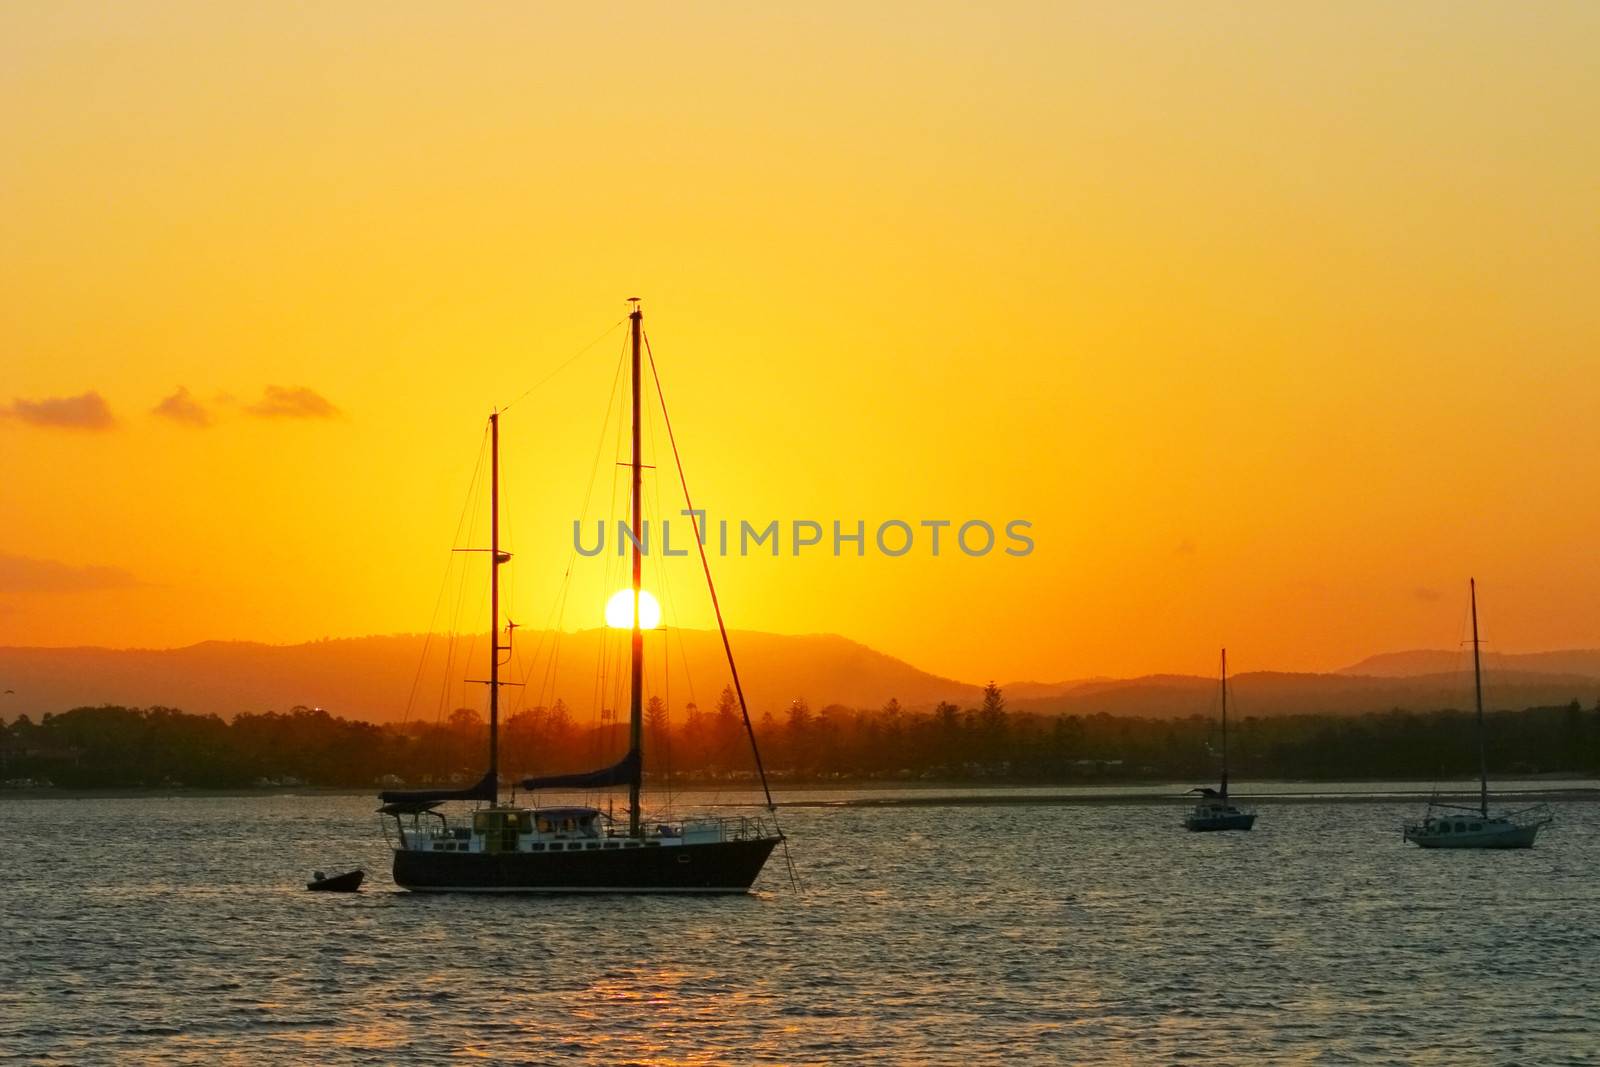 Yachts anchored at sunset with a blazing sun and sky.